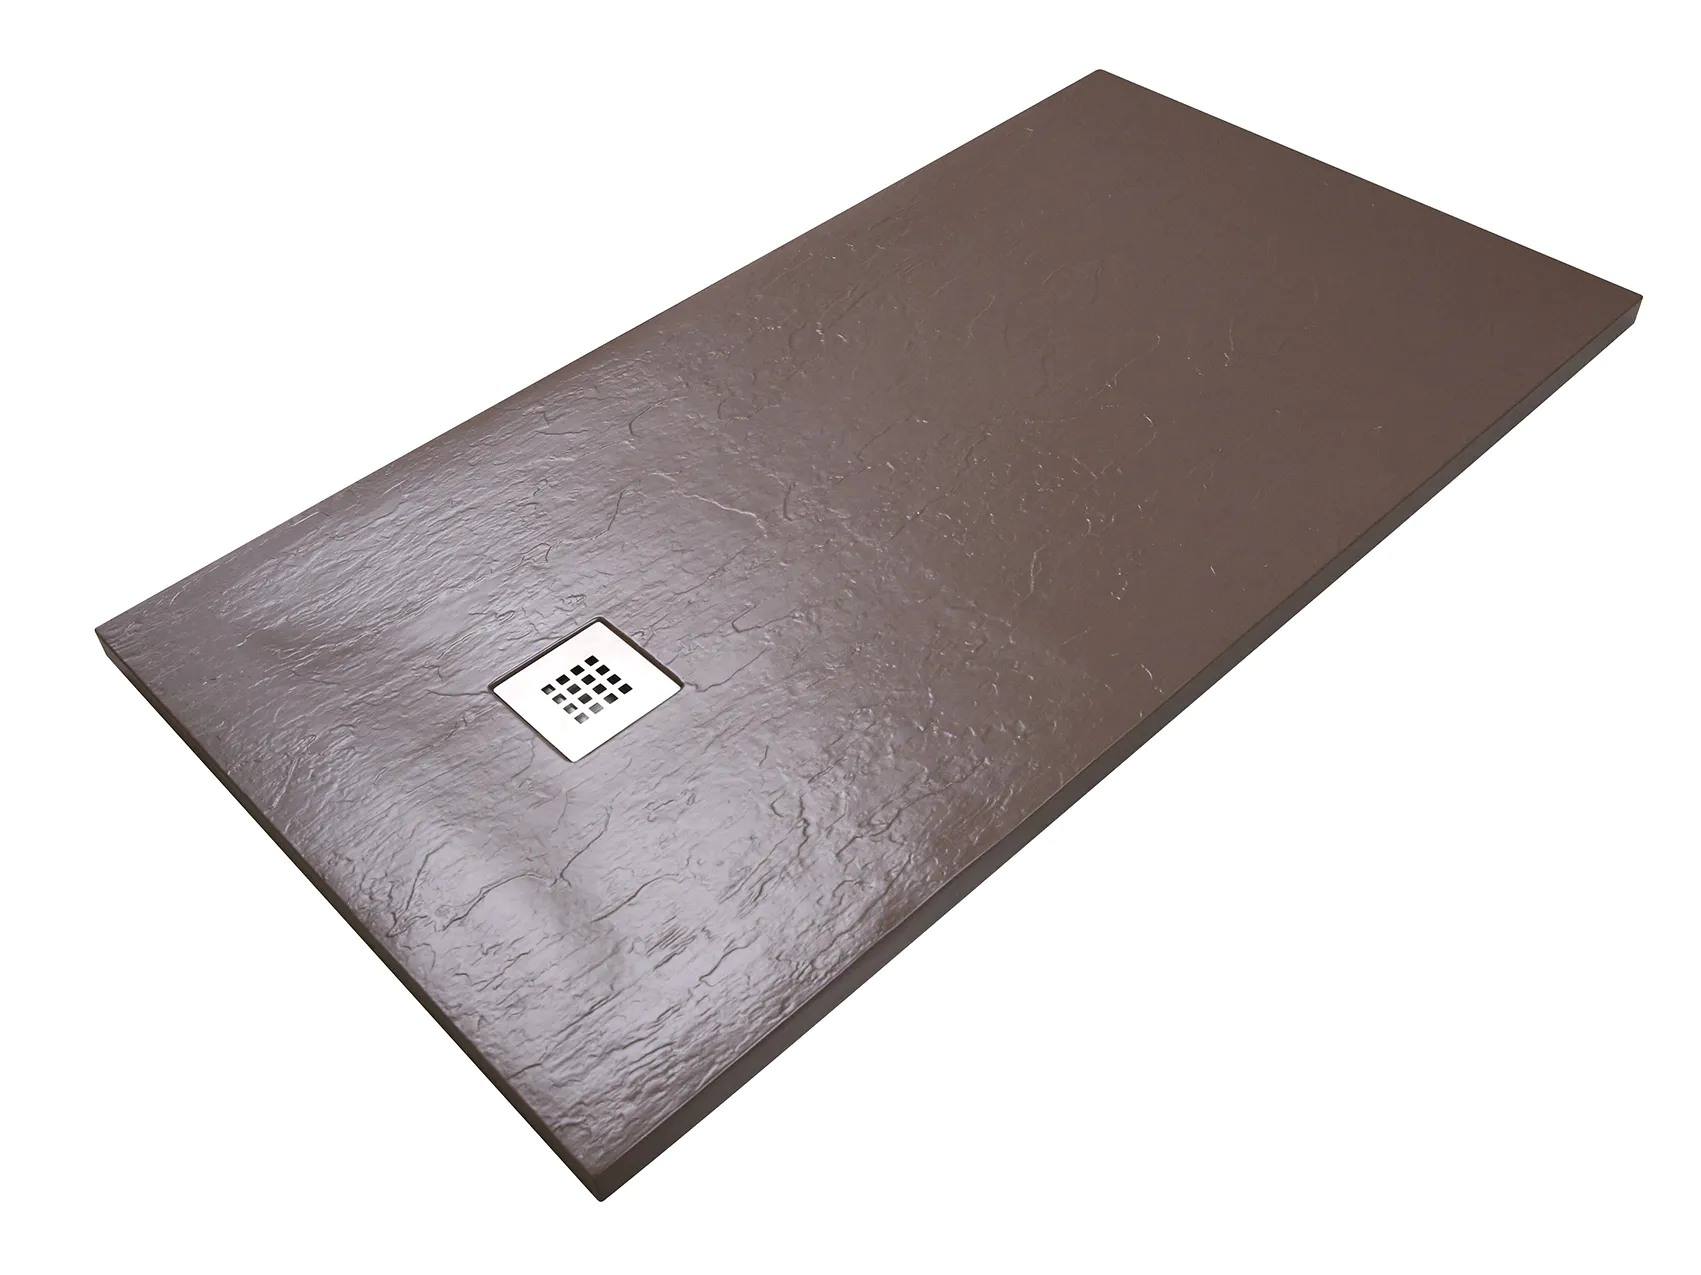 KKR Custom-made Shower Tray for the Project in New Zealand